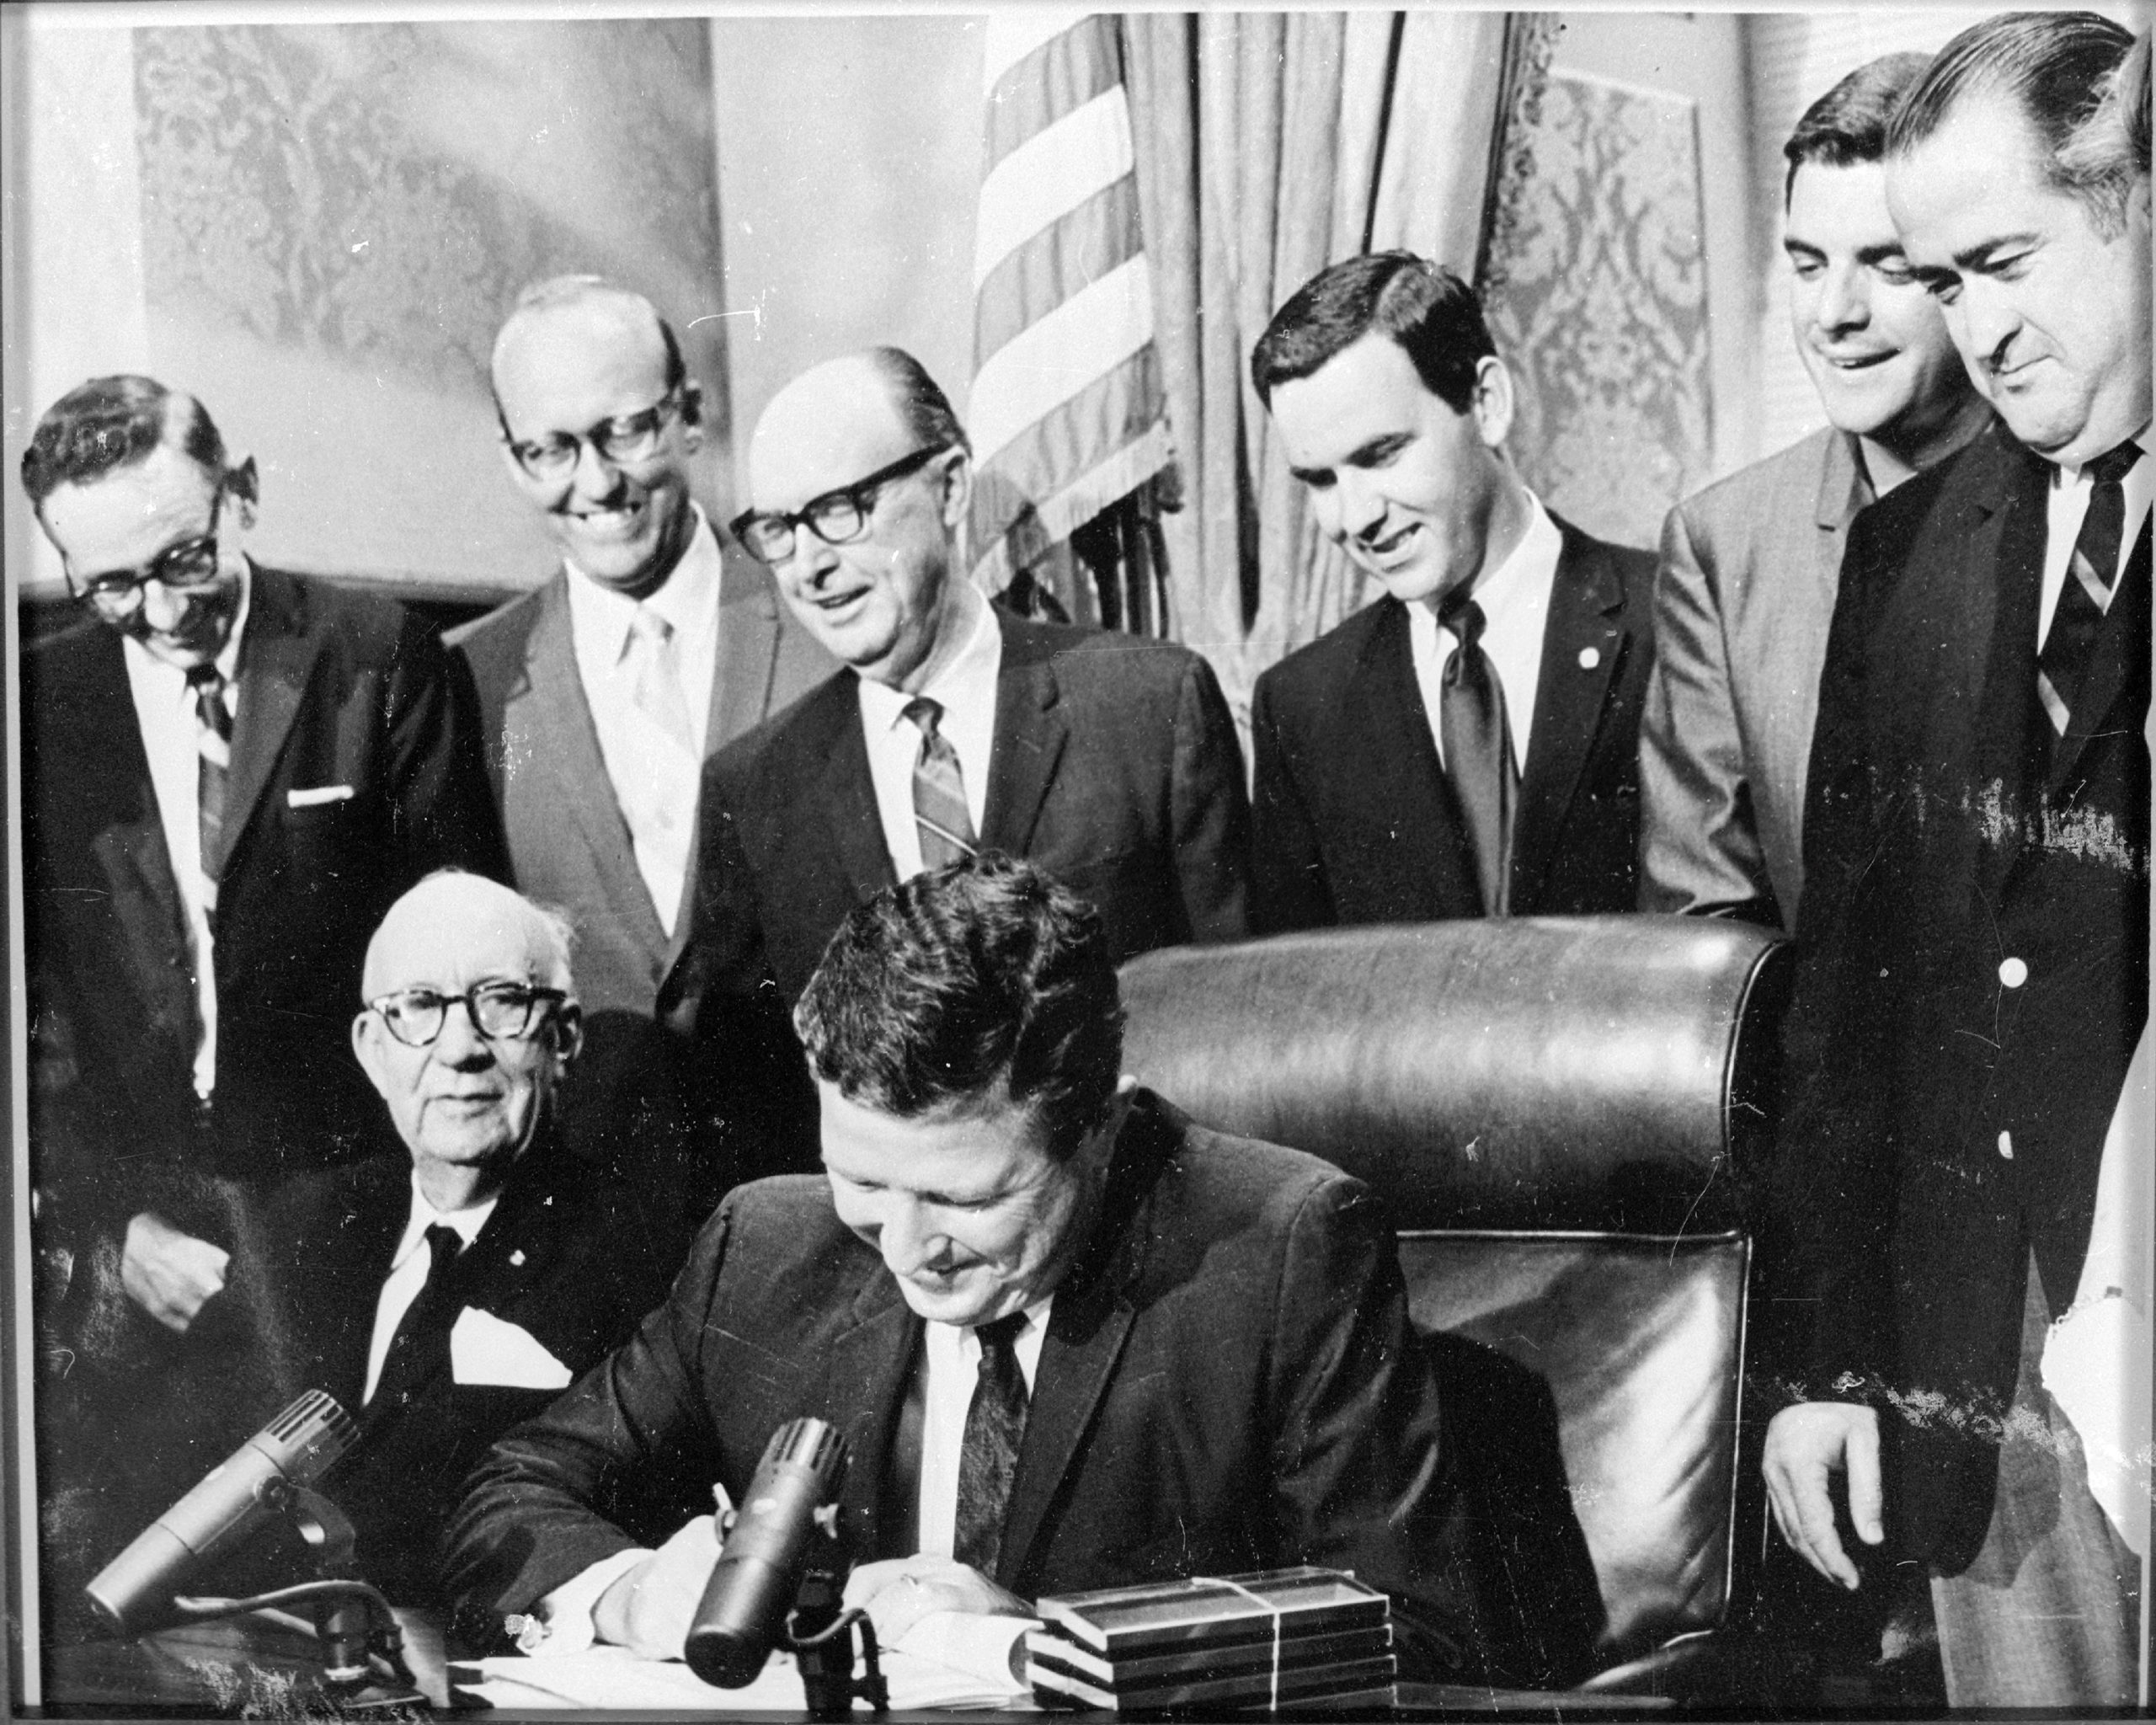 Bill signed to create Marion State College, June 25, 196.